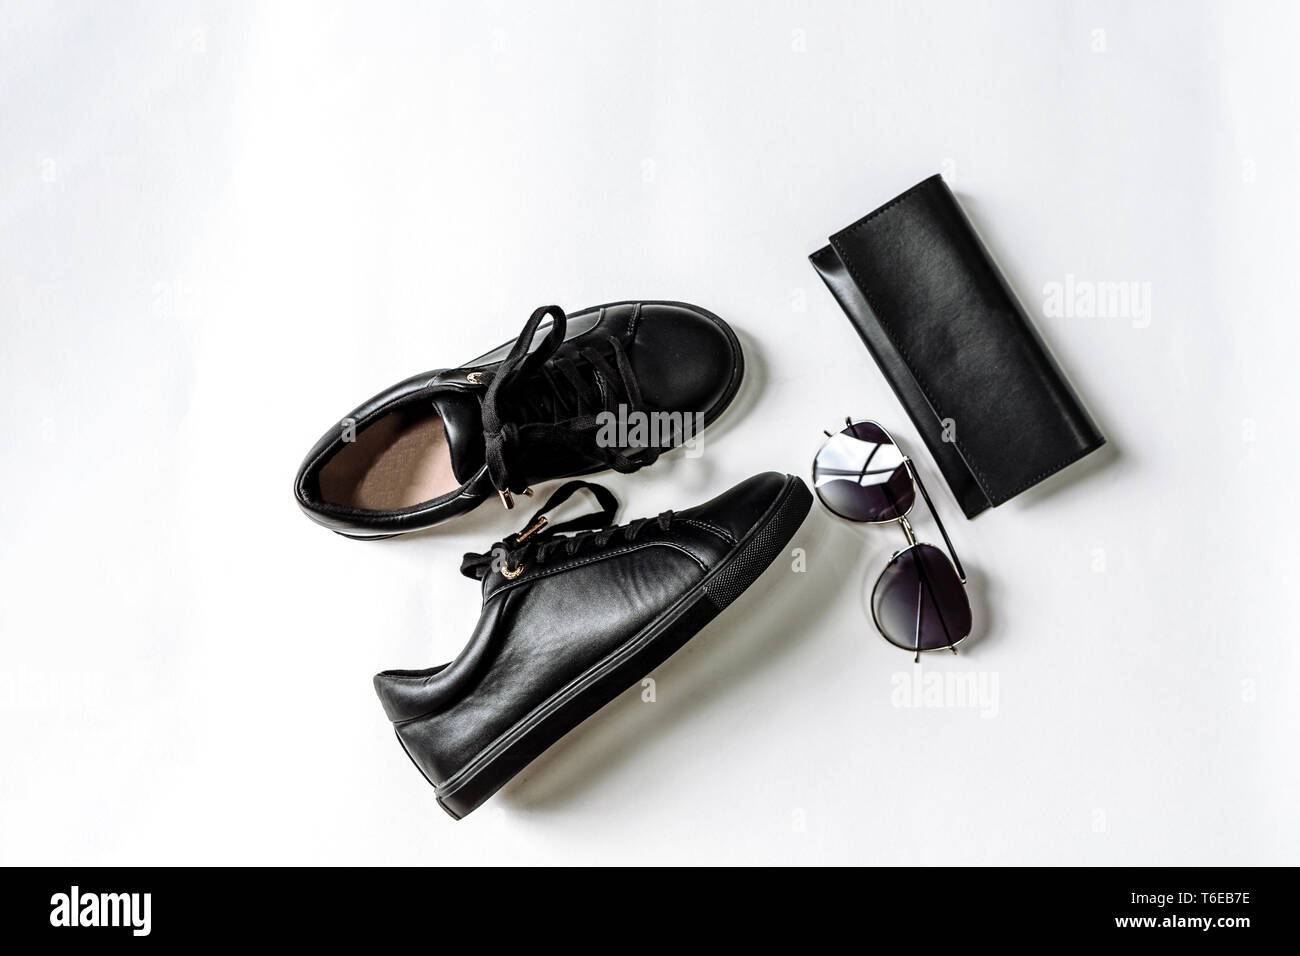 fashionable black shoes, purse and sunglasses with black lenses on a light background Stock Photo